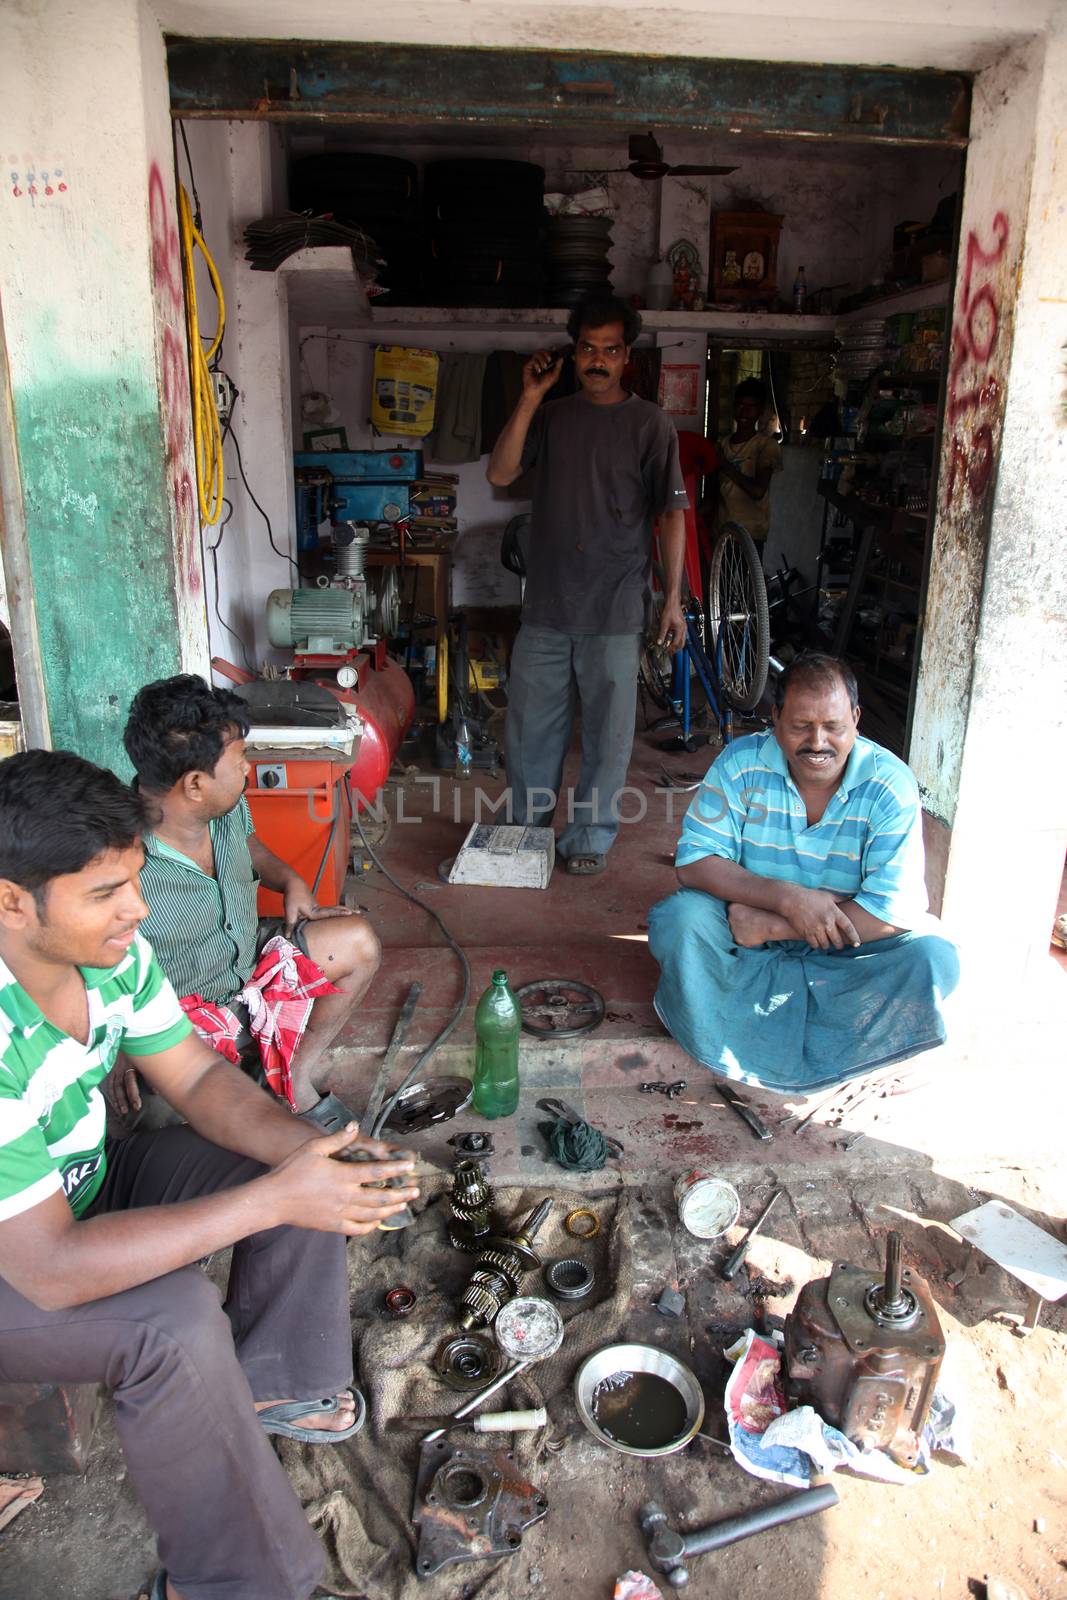 Motorbike repair service center is in working process in old building. Bikes is the common individual transport in India